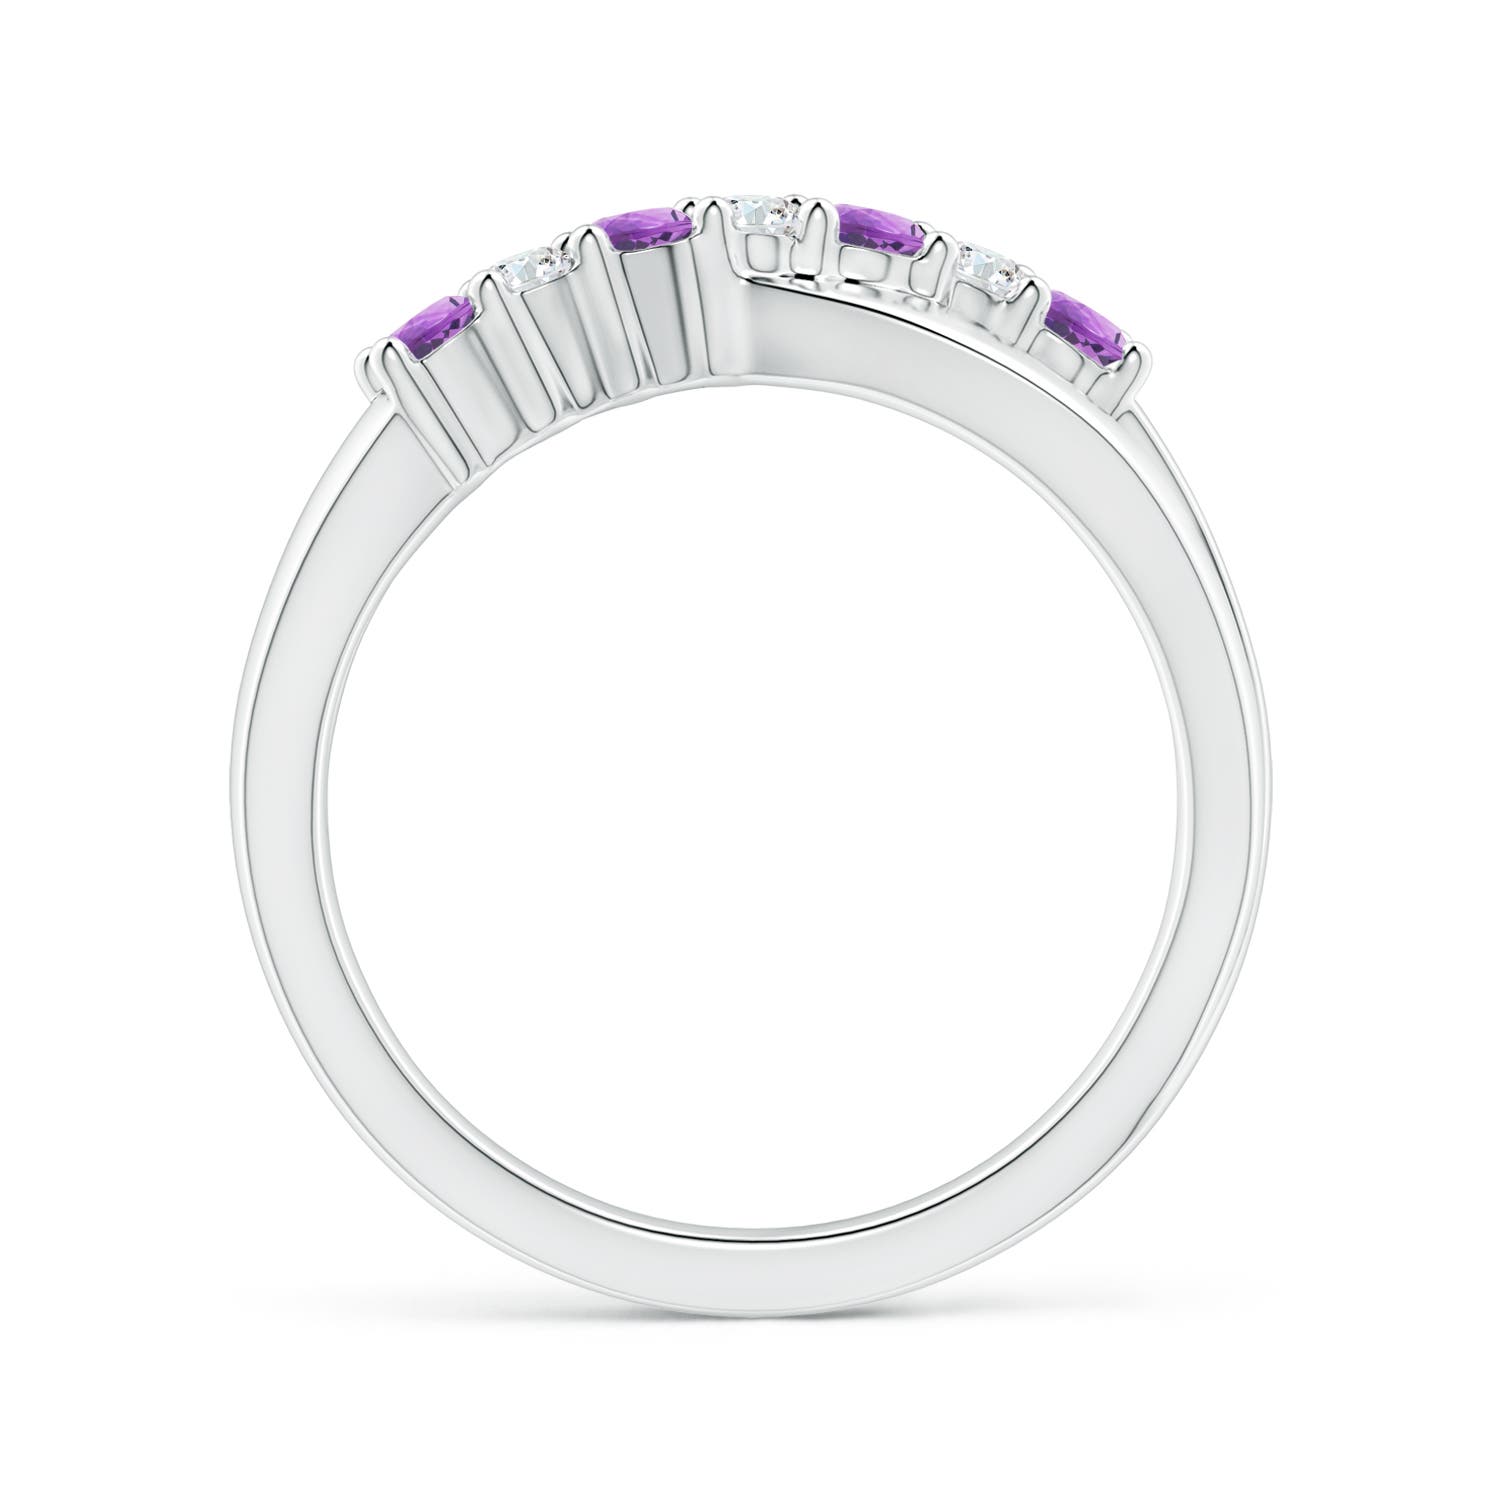 A - Amethyst / 0.36 CT / 14 KT White Gold